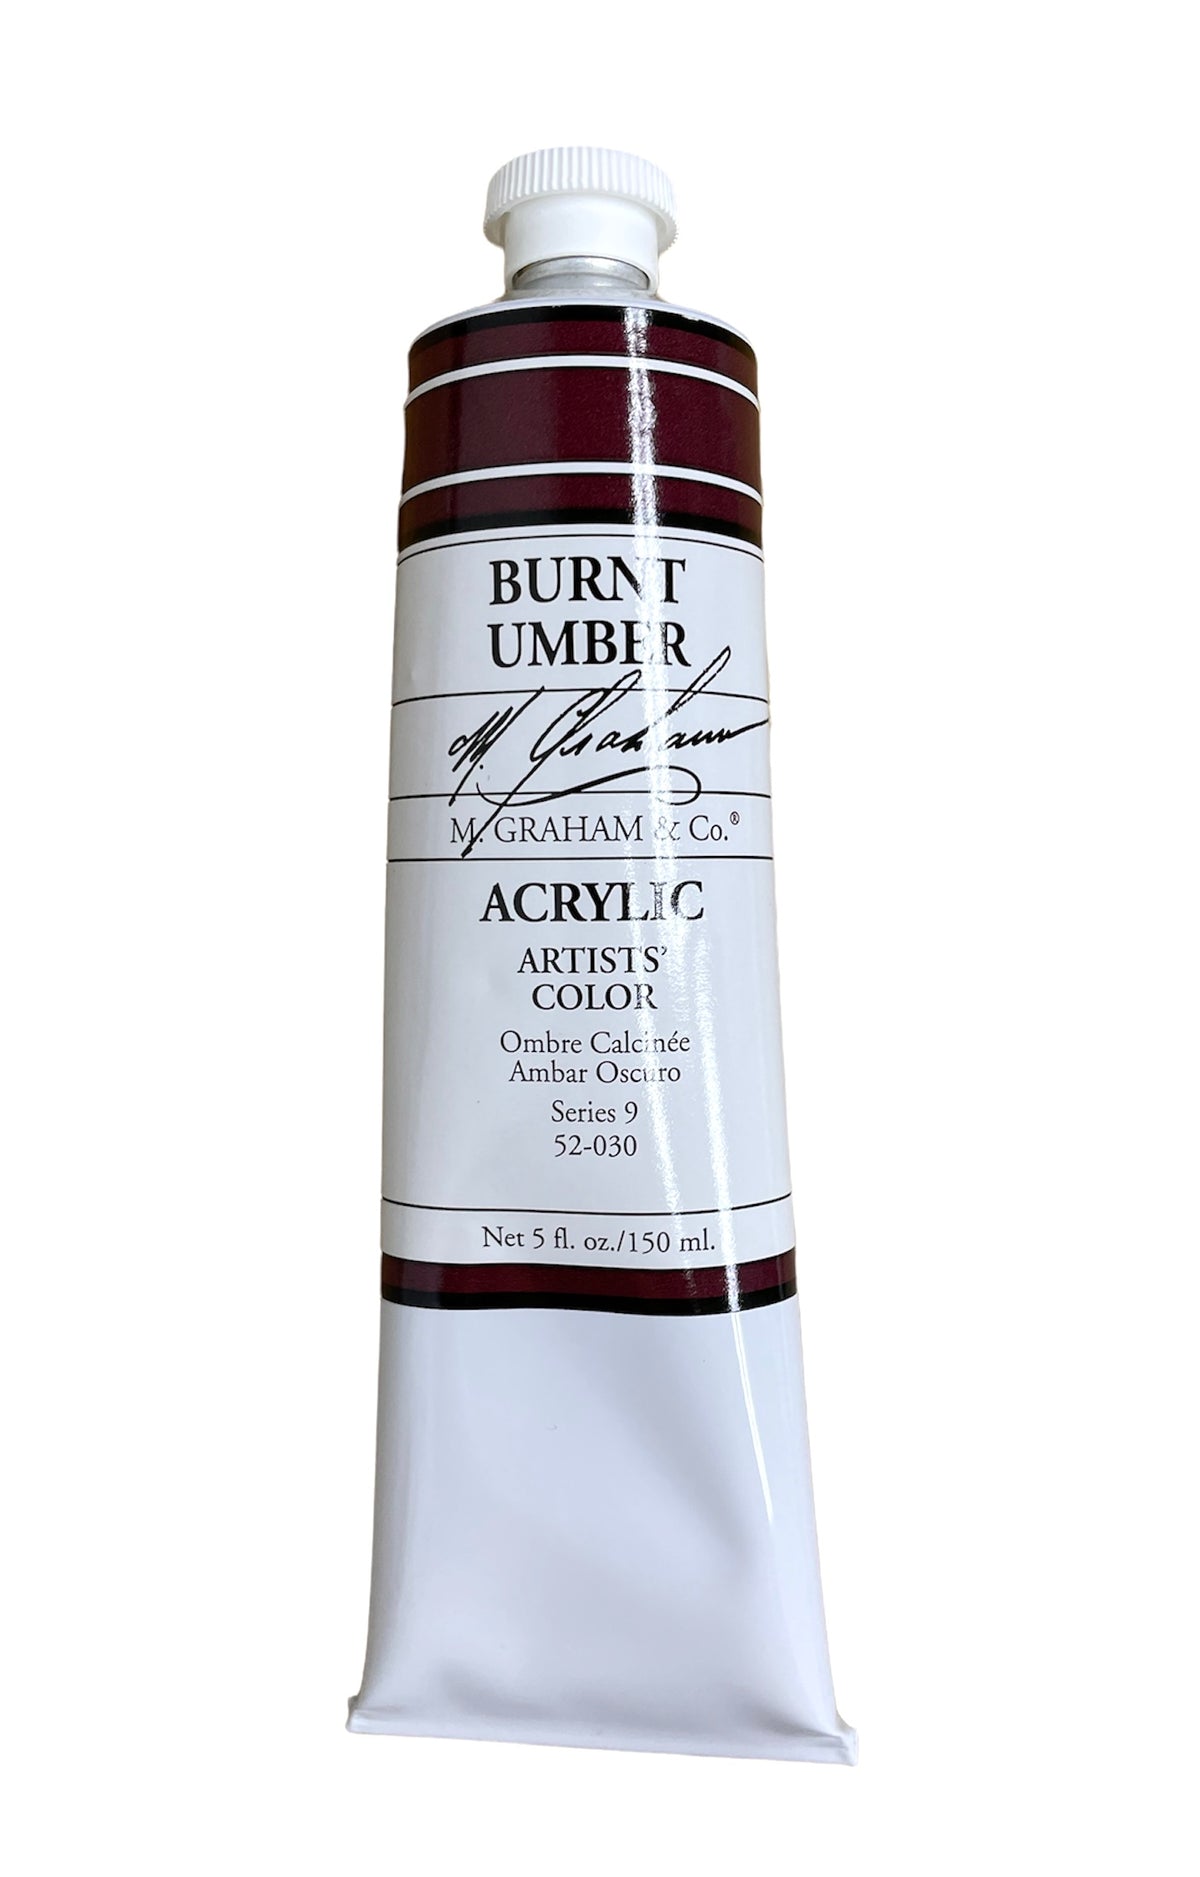 M. Graham Acrylic BURNT UMBER in 150ml. Available in Drawing Etc. Art Supplies store, Singapore